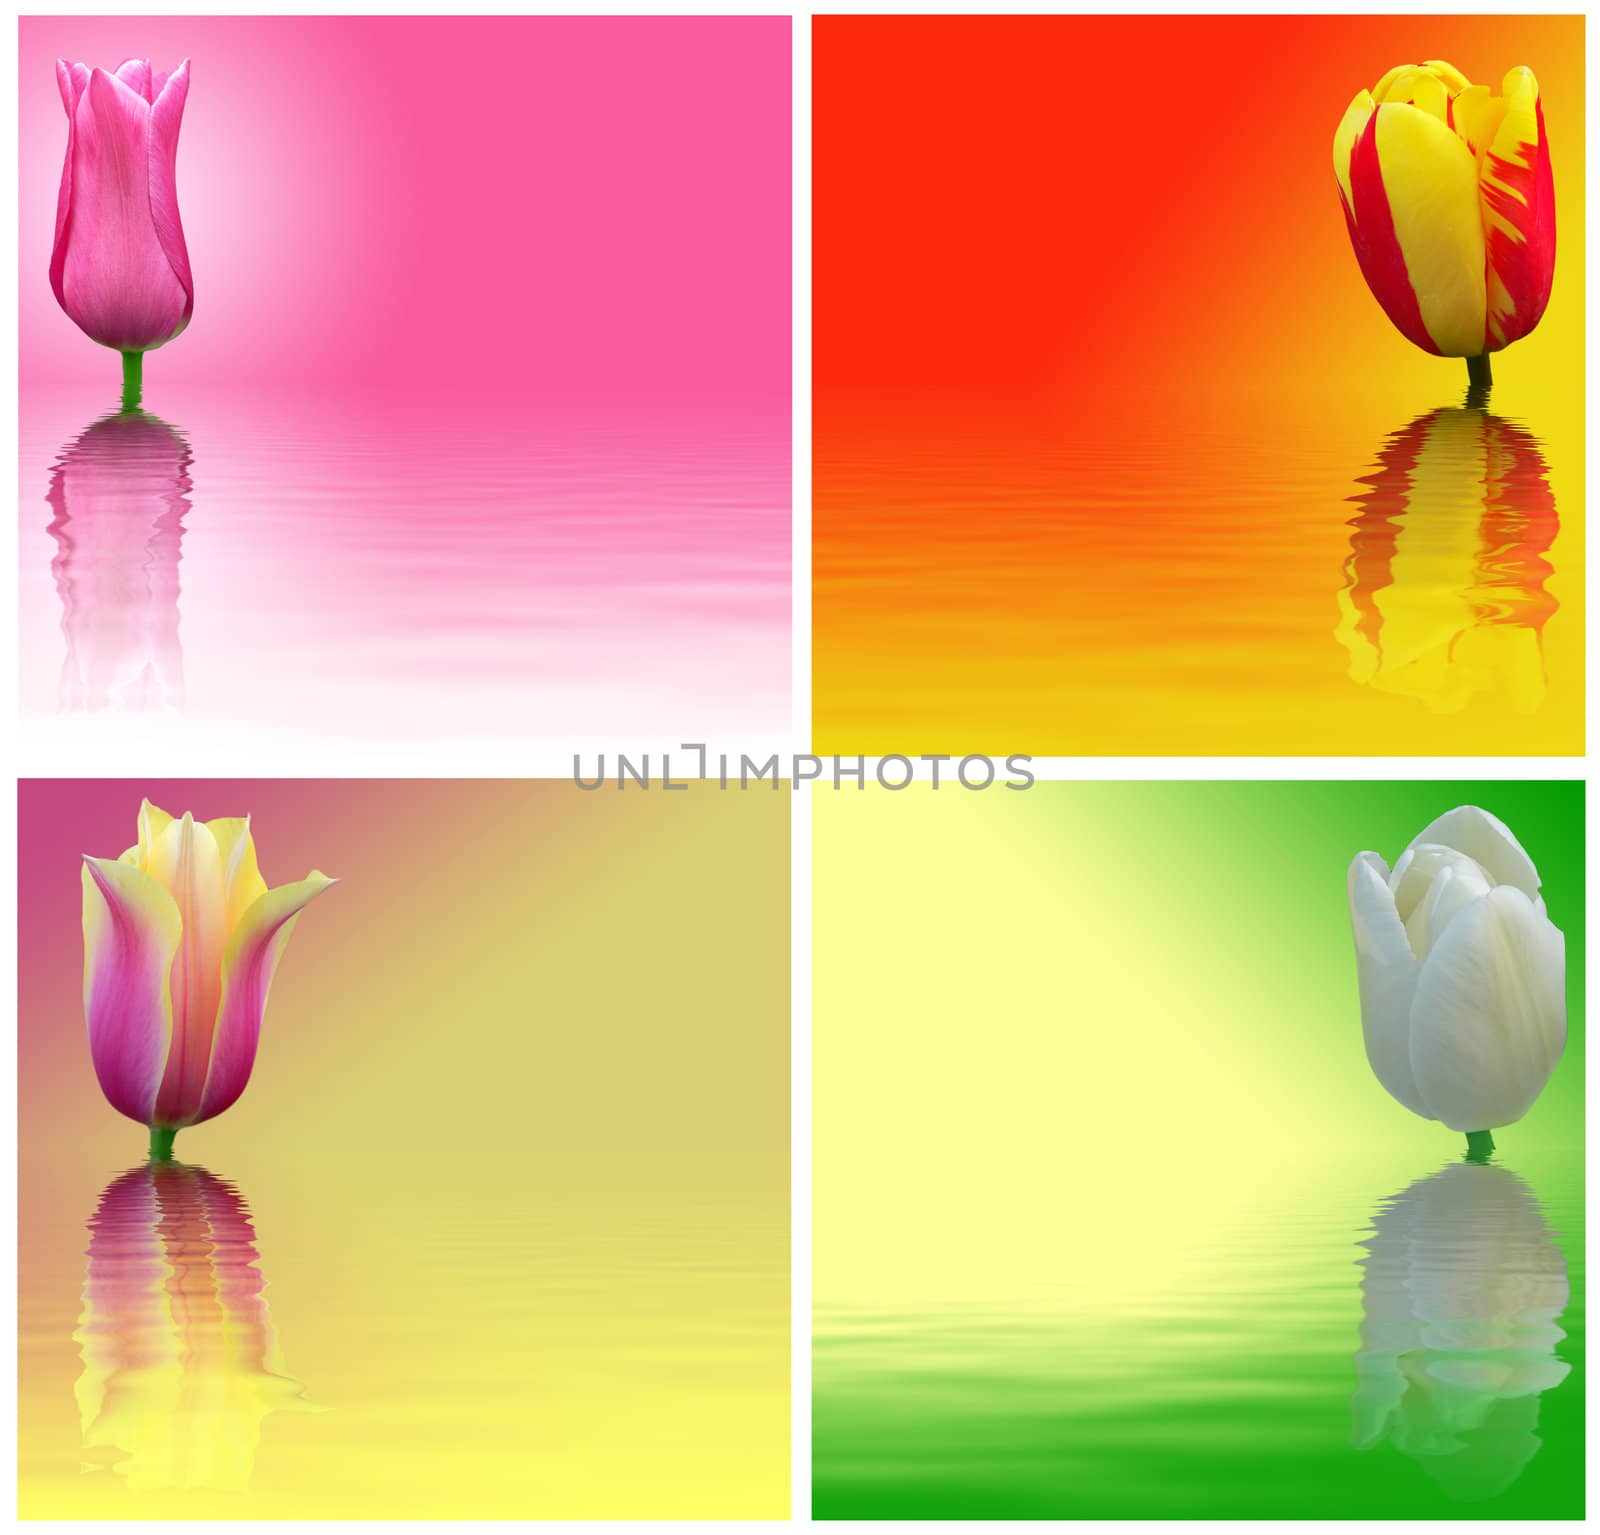 Red, yellow, white and pink tulips on a colored background. Abstract image flowers with reflection on water.